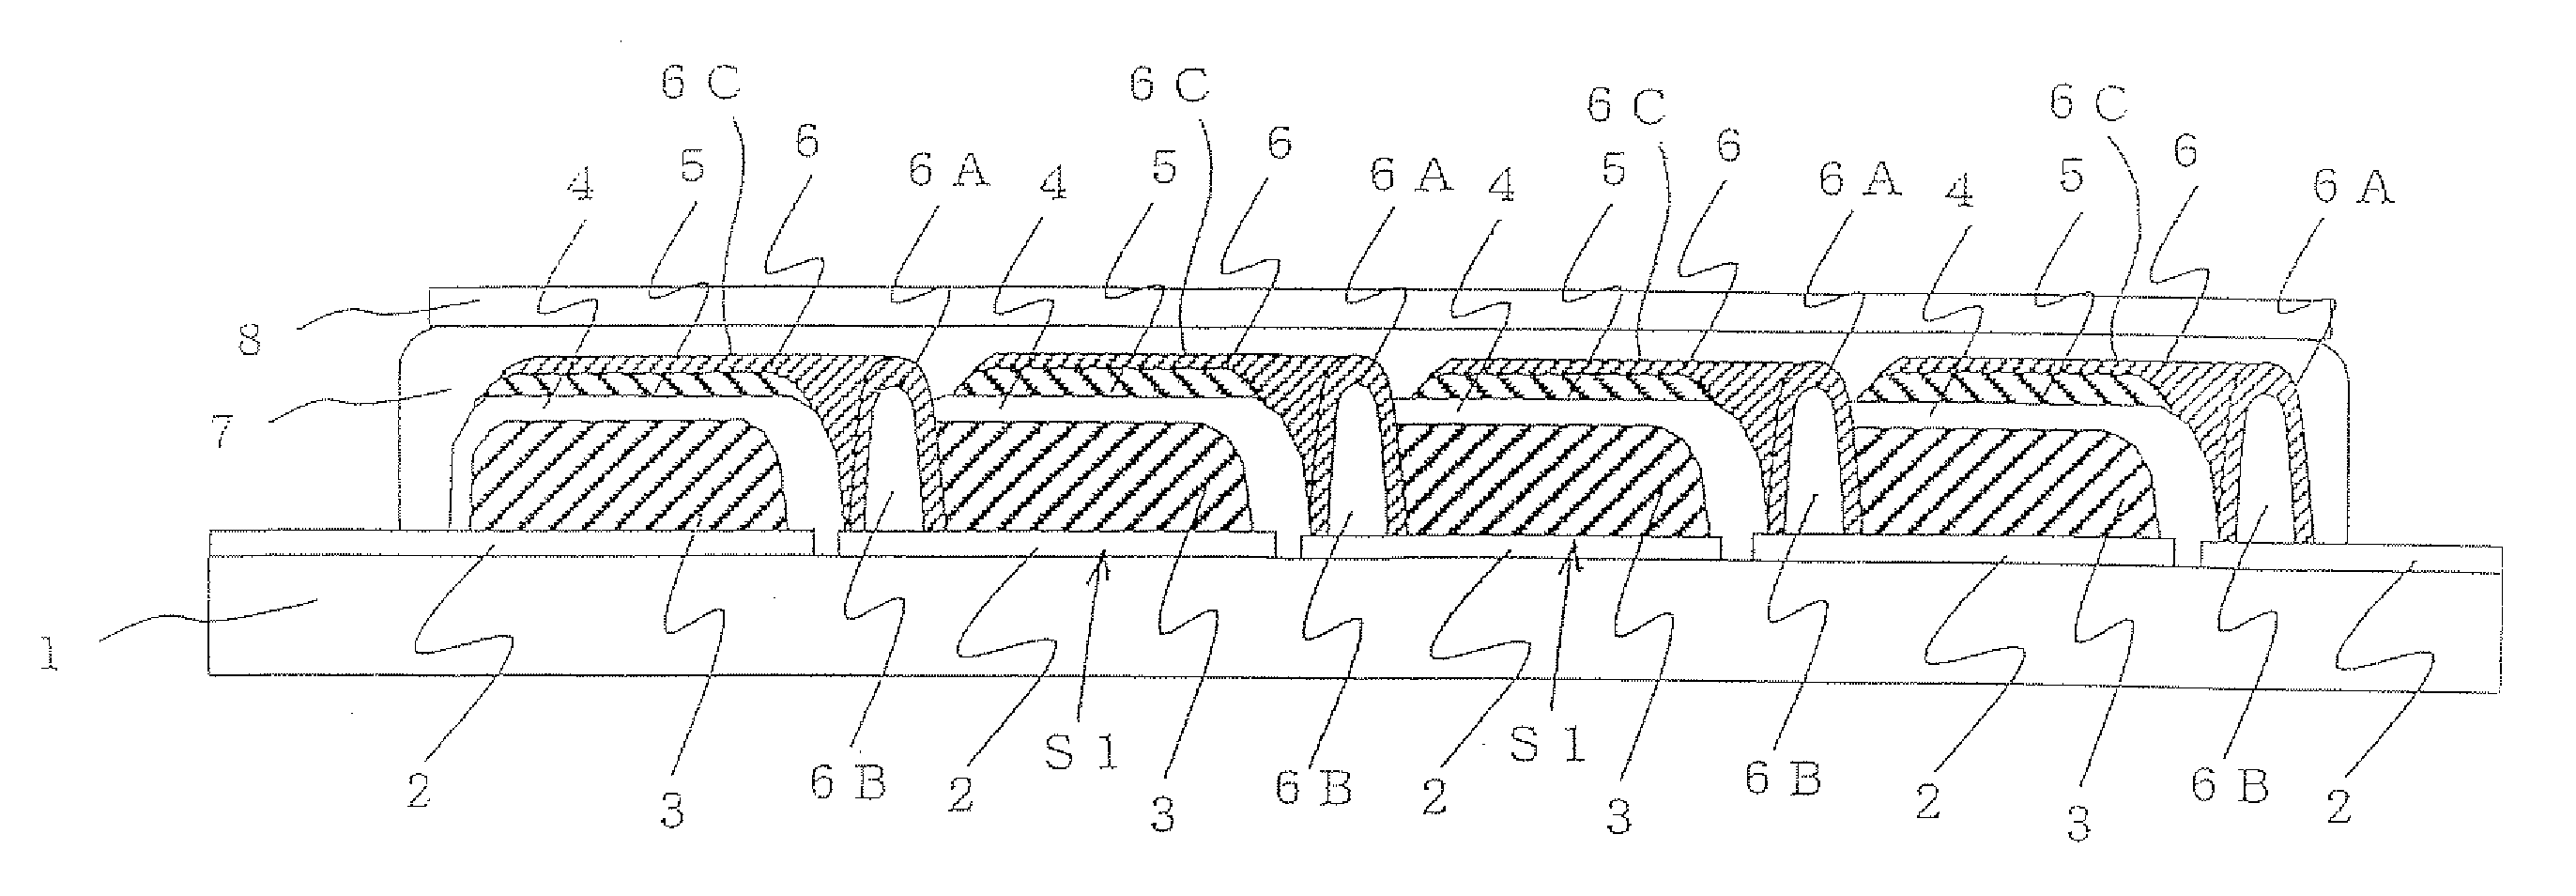 Dye-sensitized solar cell module and method of producing the same